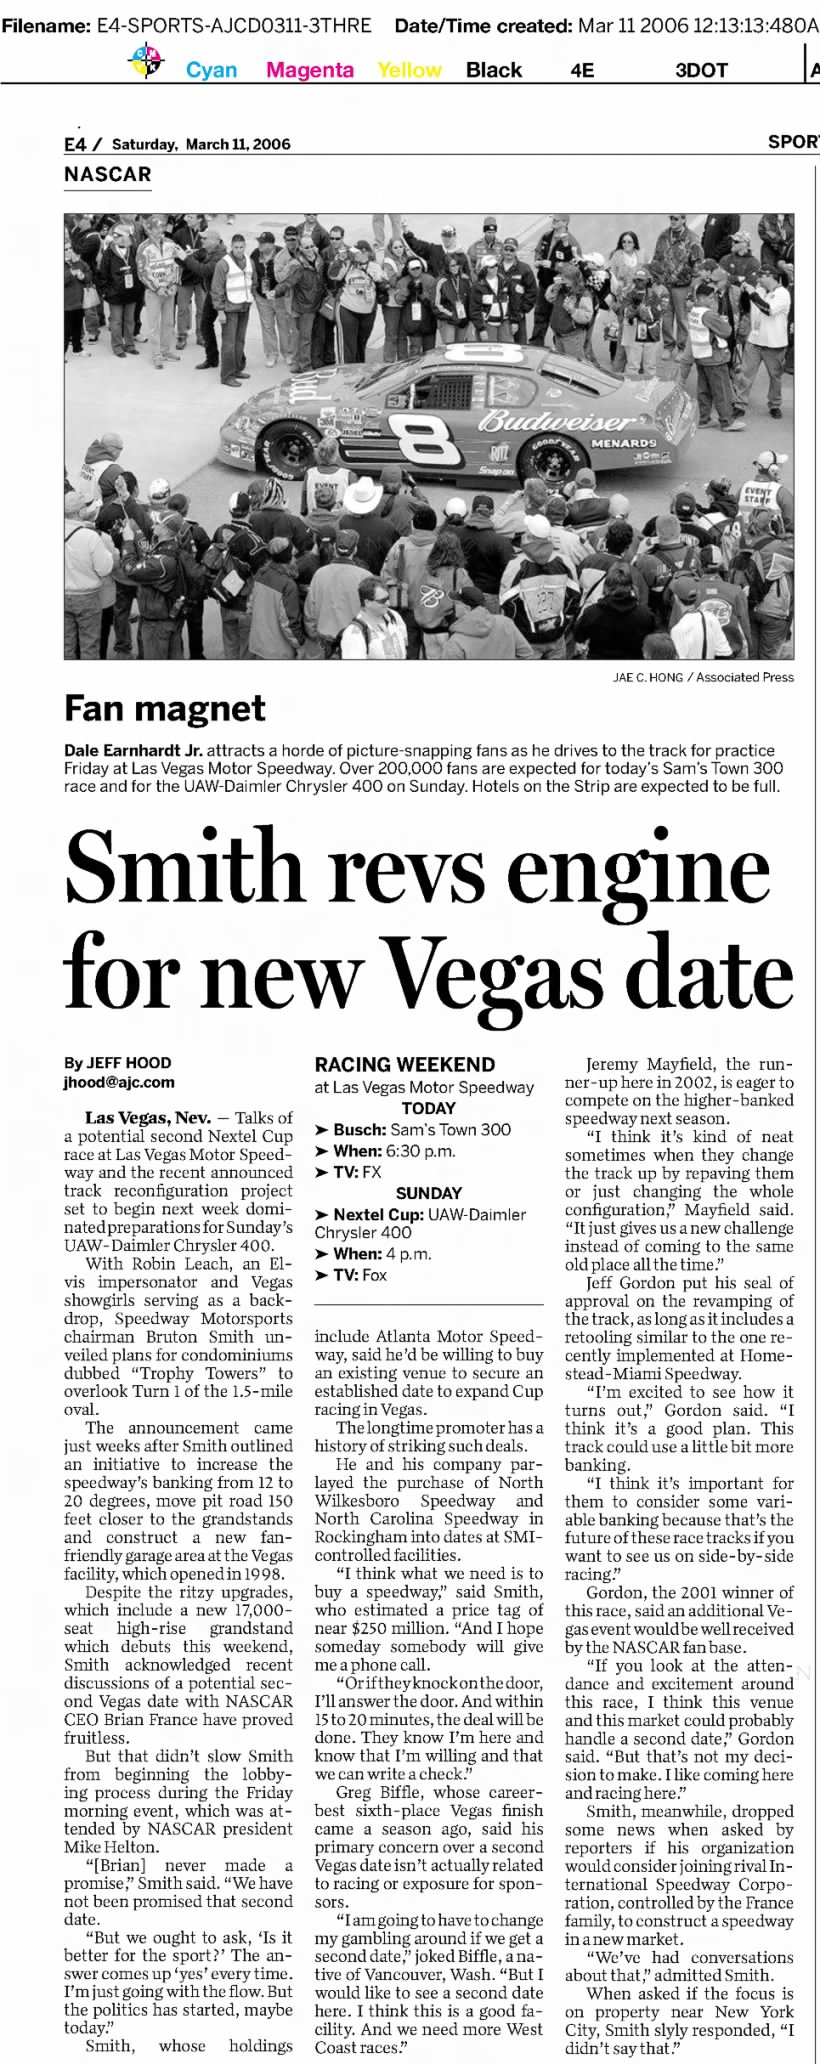 Smith revs engine for new Vegas date